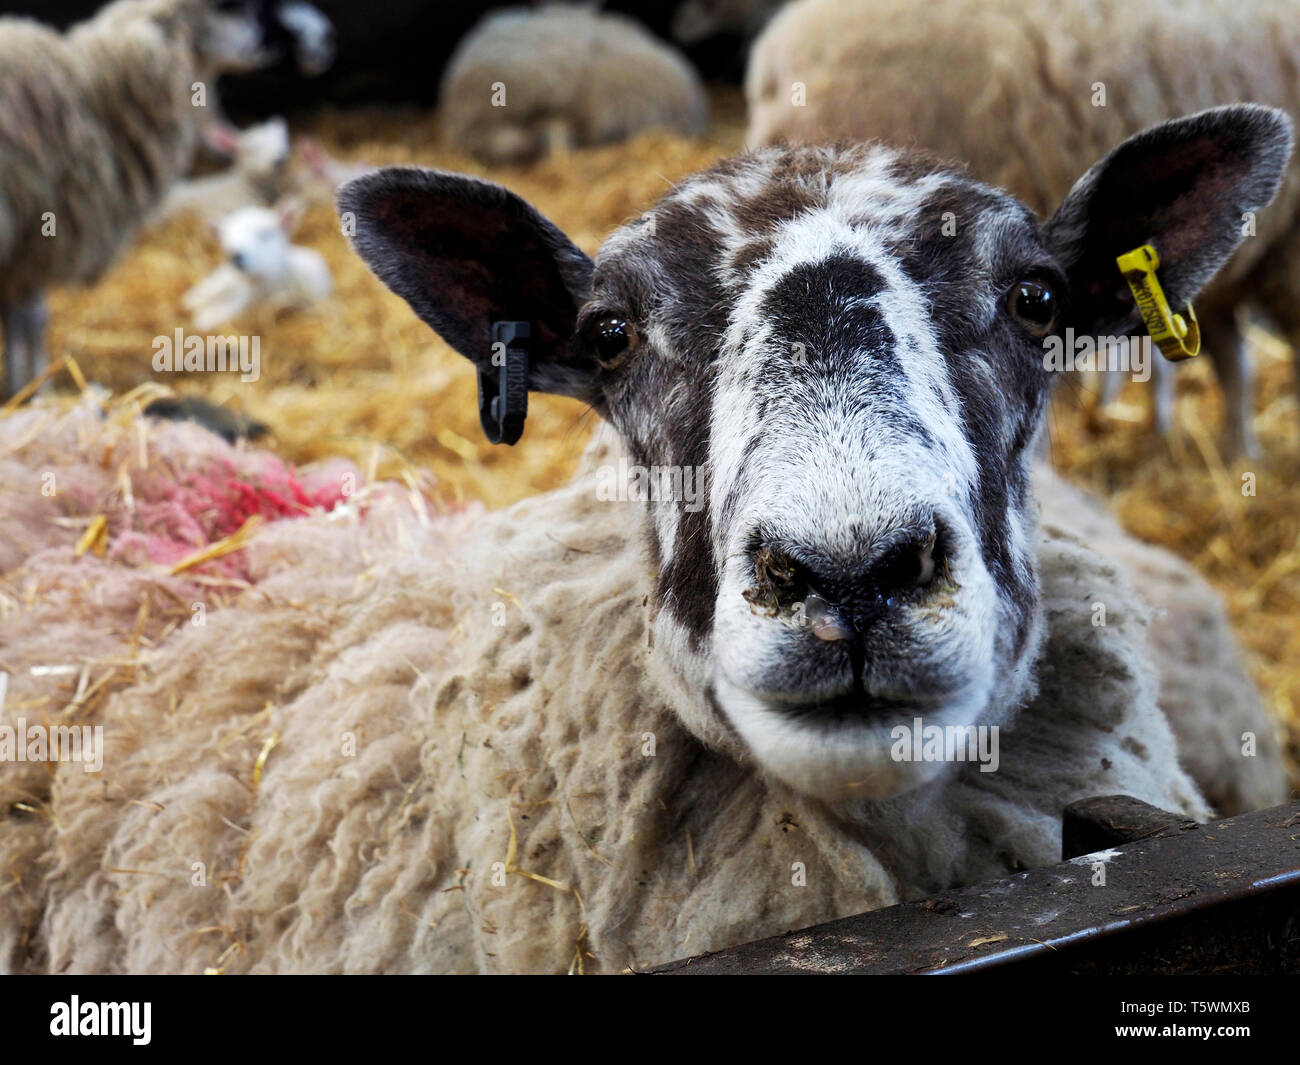 A ewe sheep with black and white markings on her head stares at the camera. The ewe and others are in a barn on straw bedding for lambing. Stock Photo